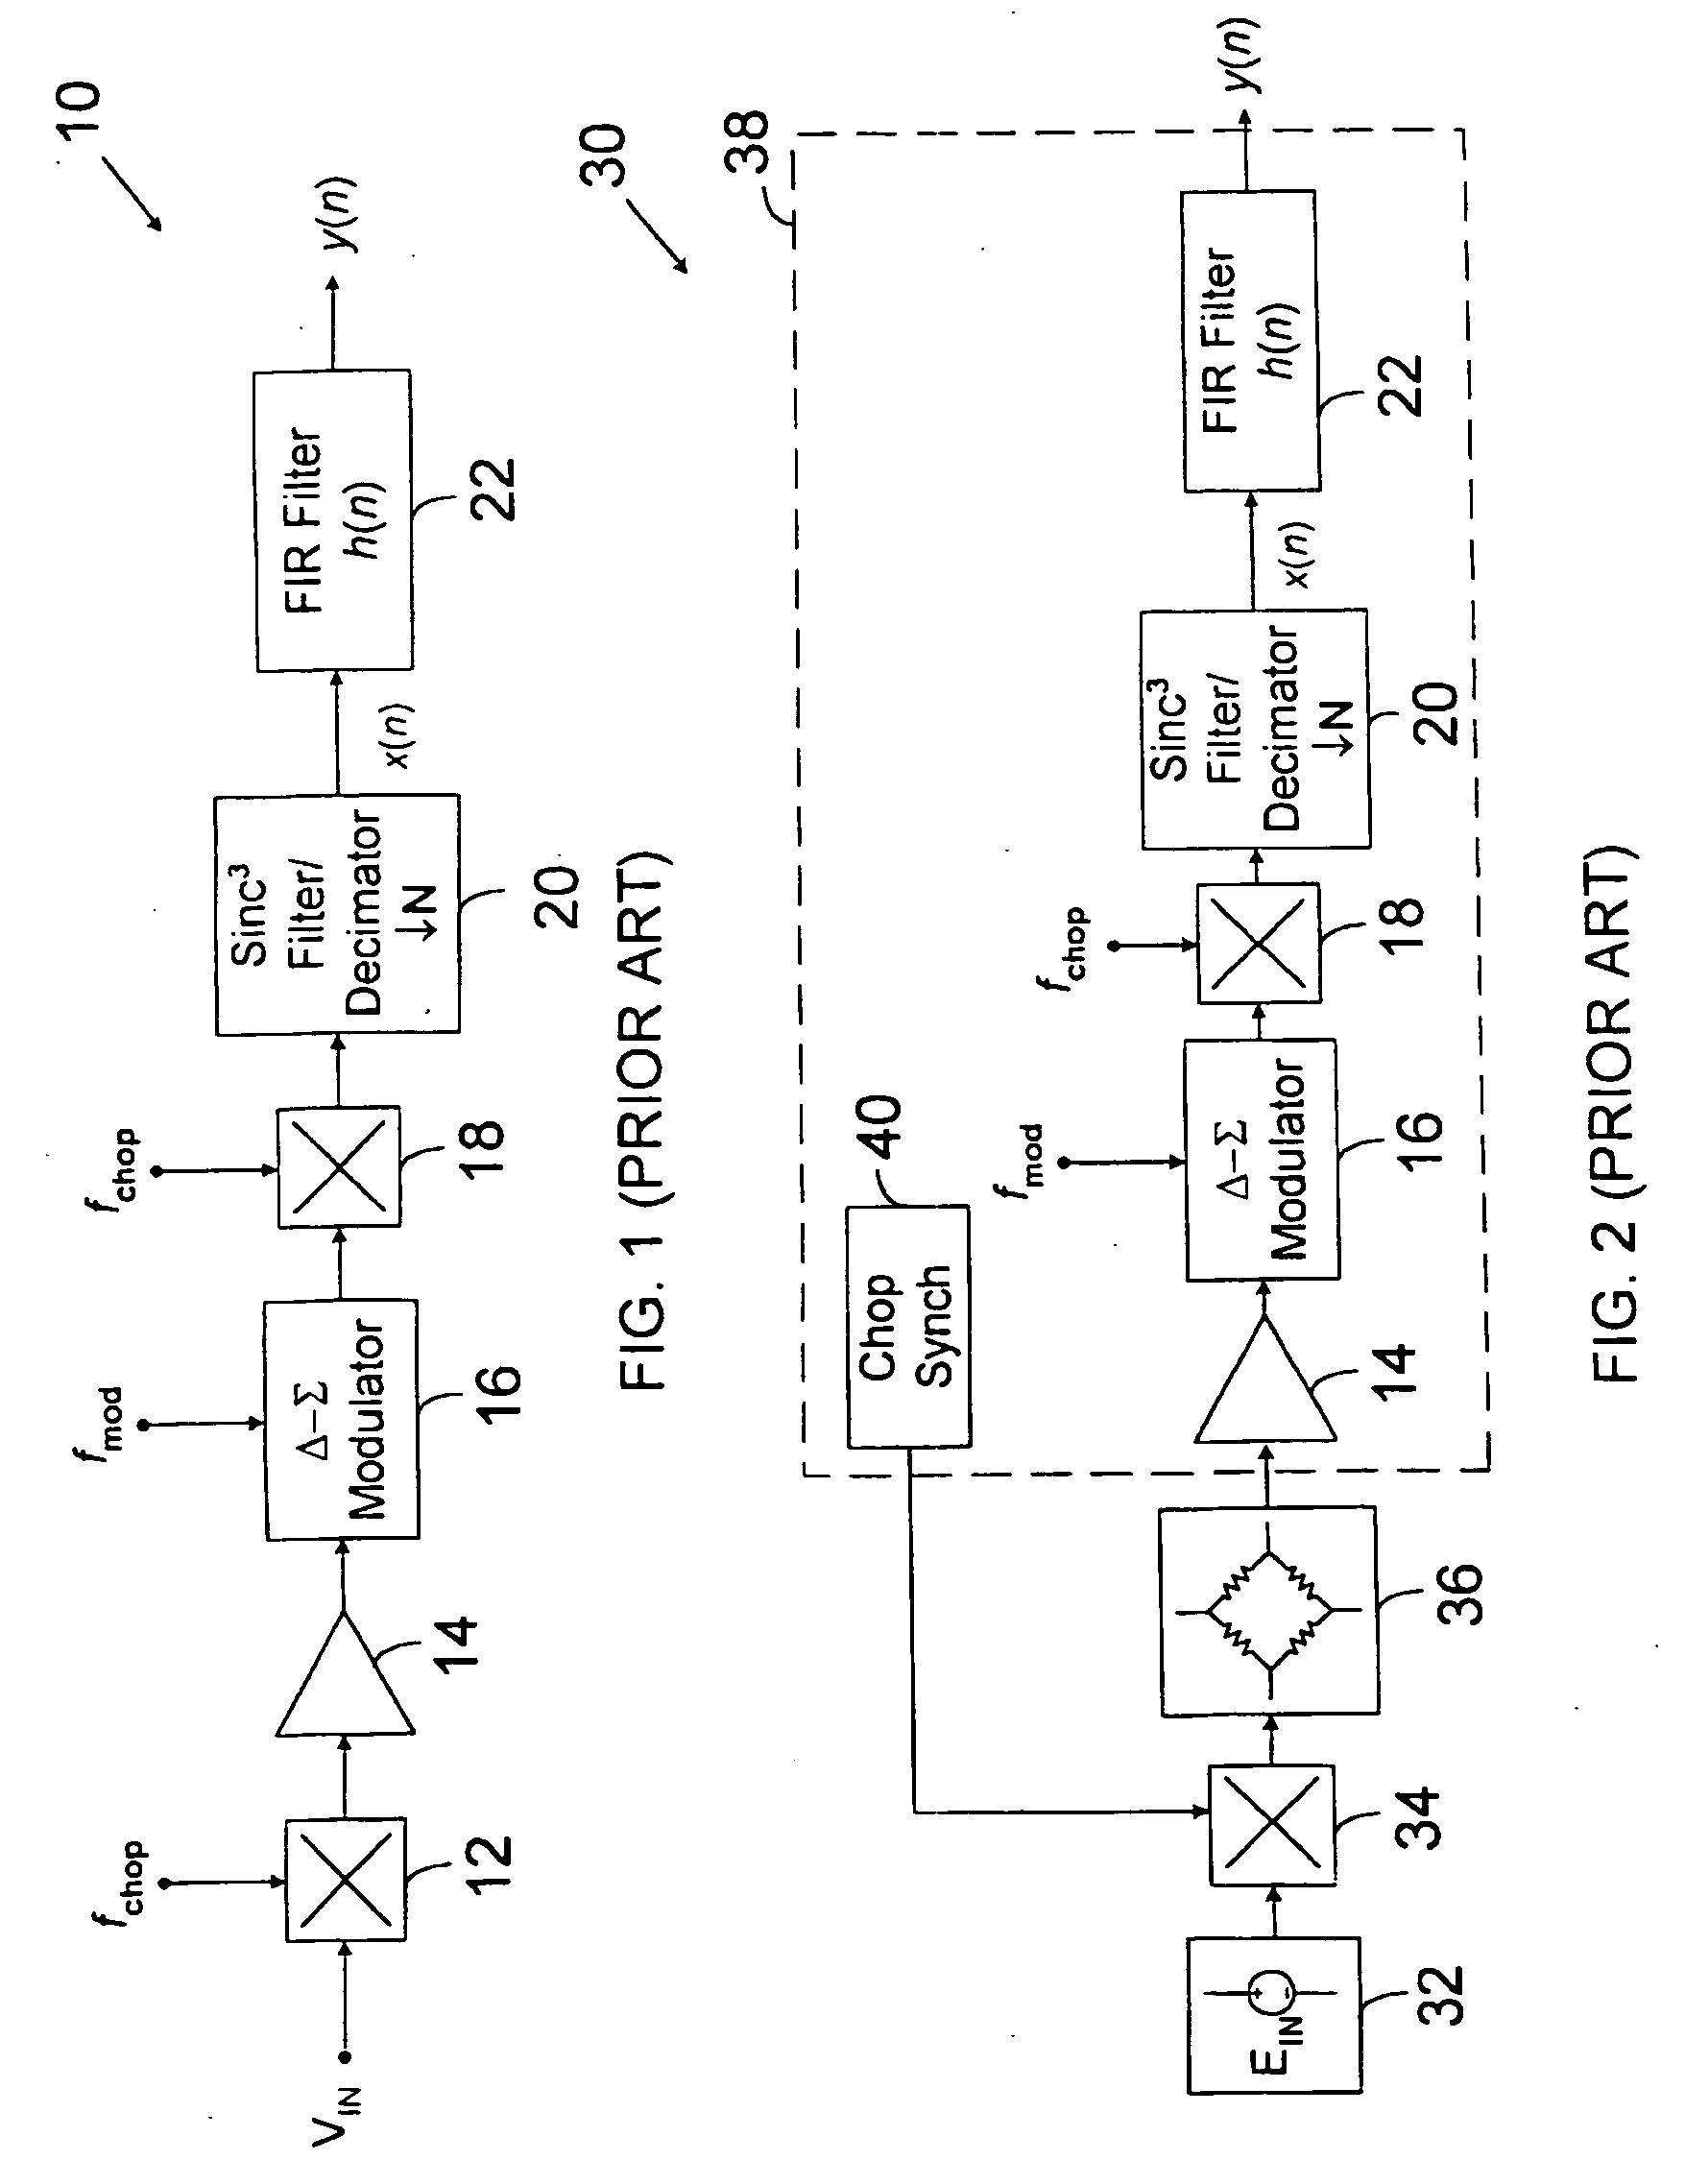 Buffered oversampling analog-to-digital converter with improved DC offset performance